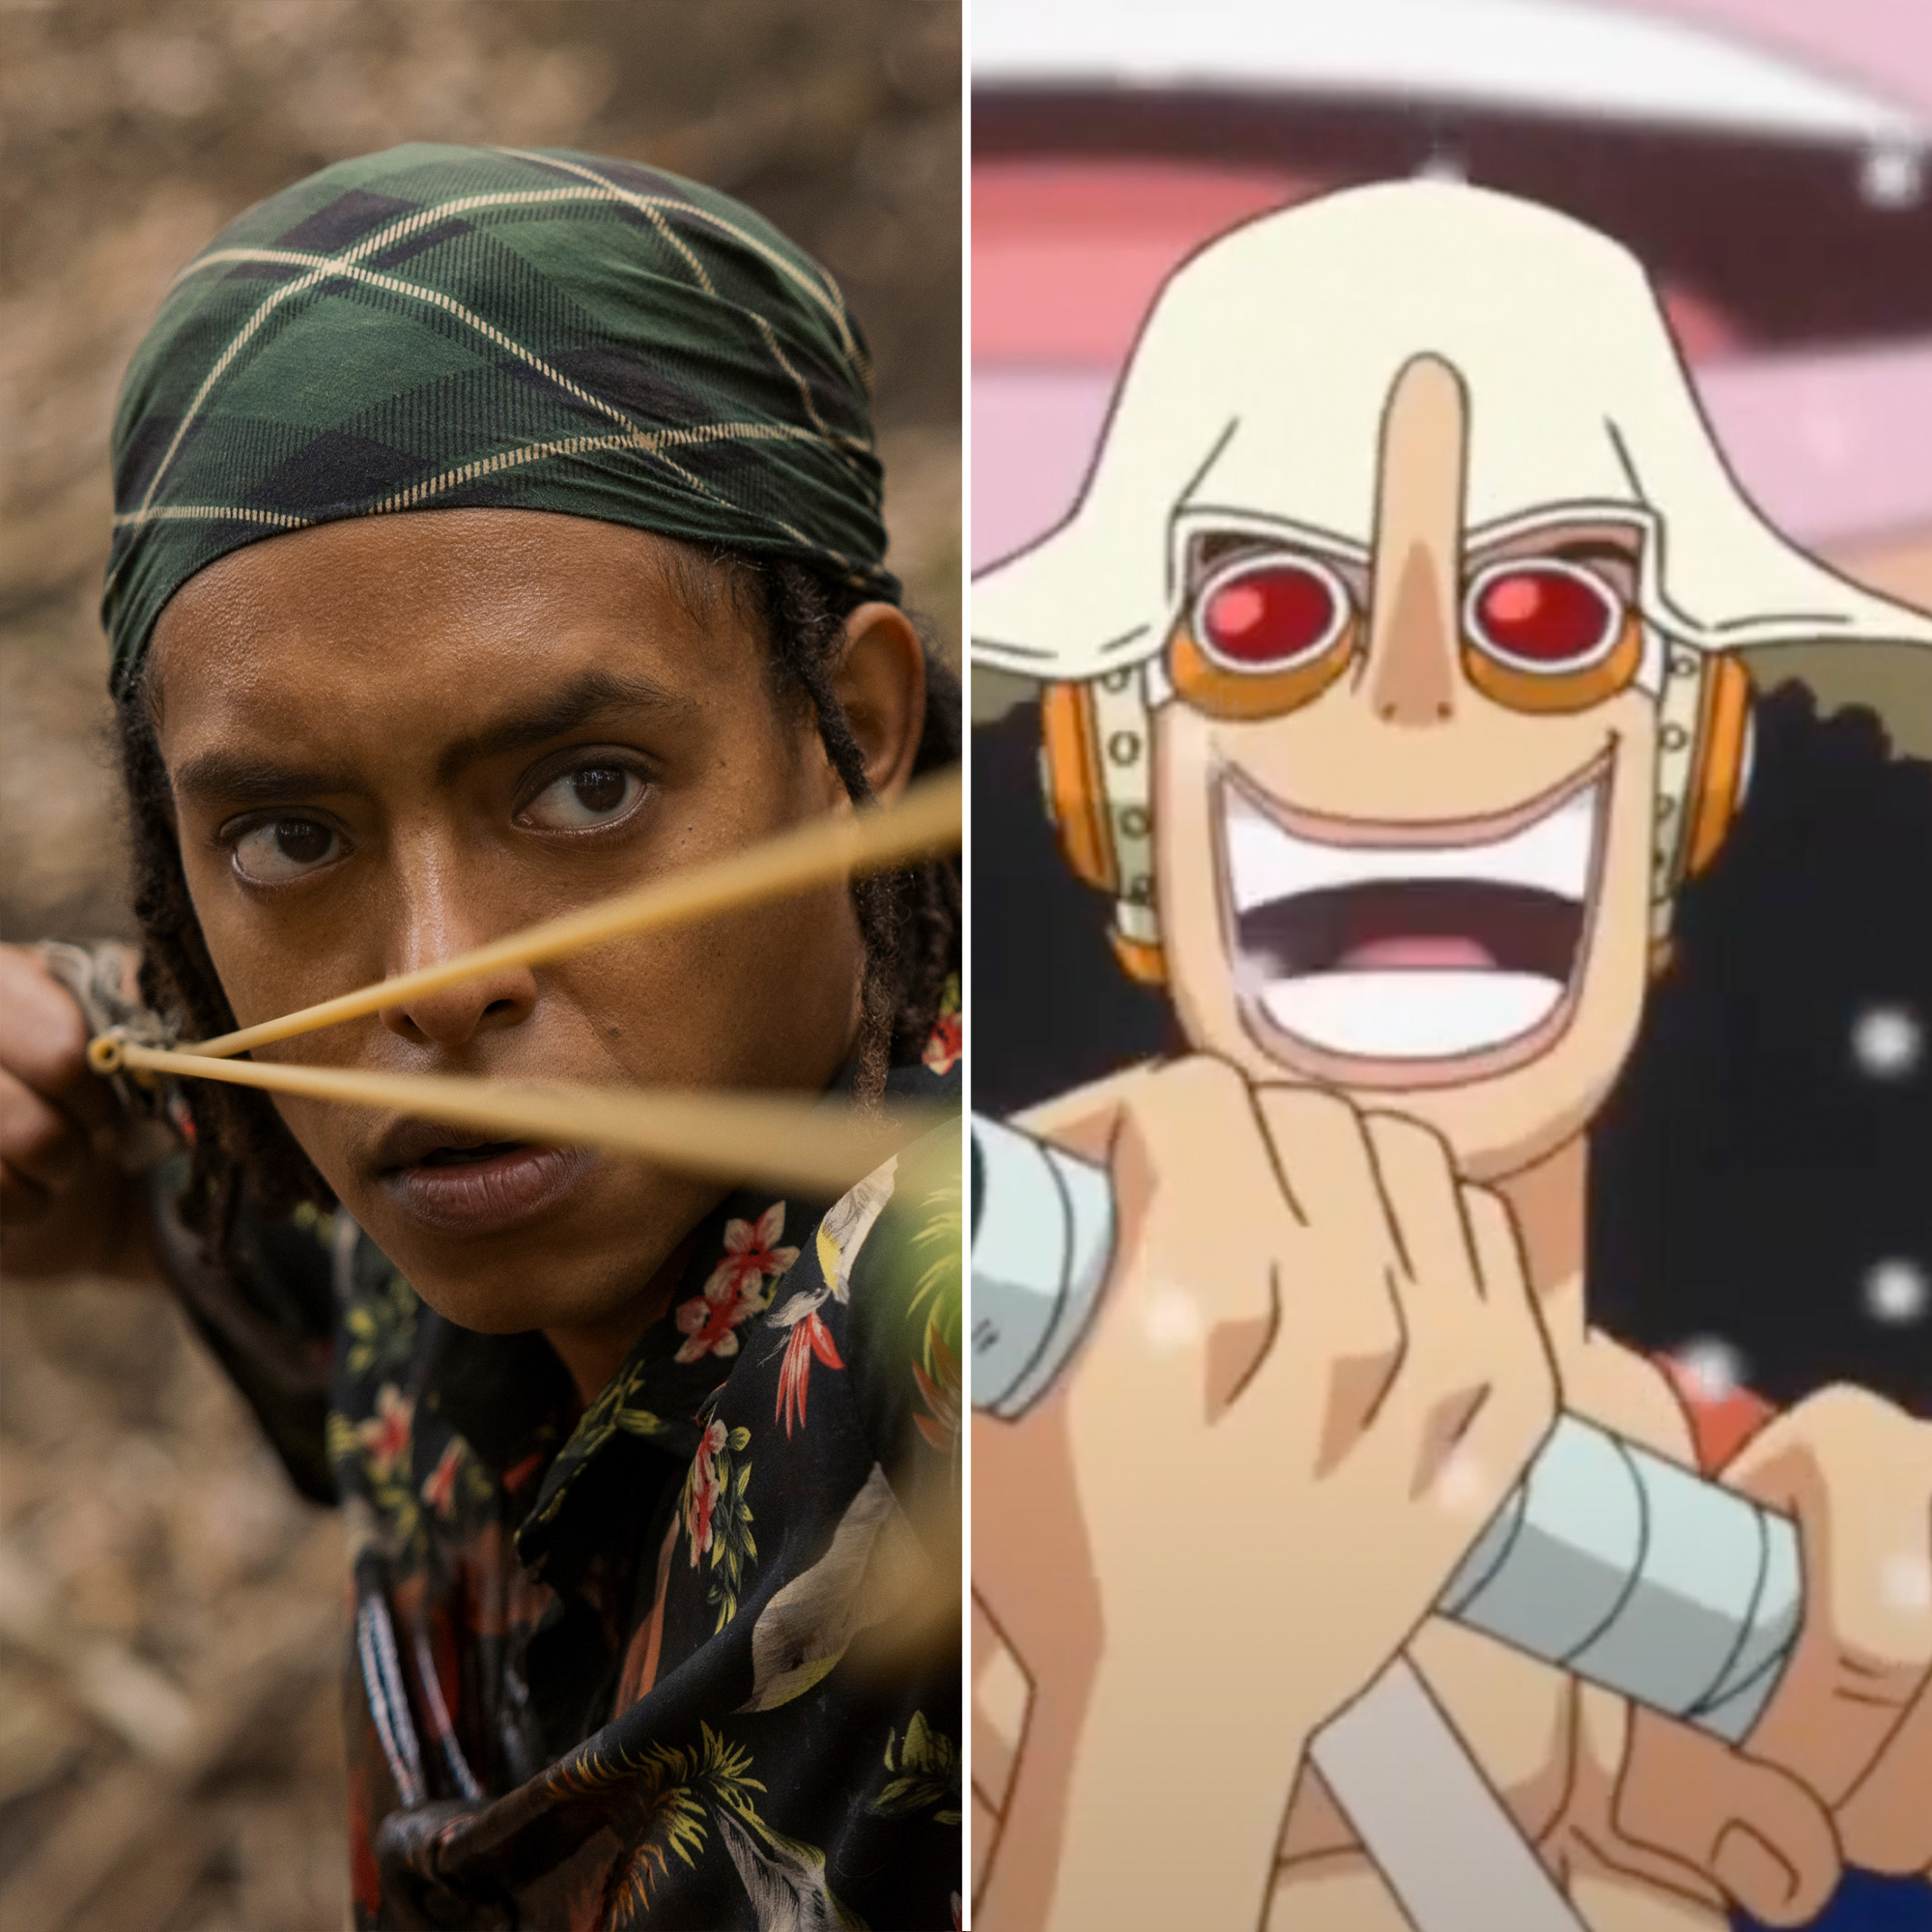 Netflix's One Piece: Check Out This Side-by-Side Comparison to the Anime